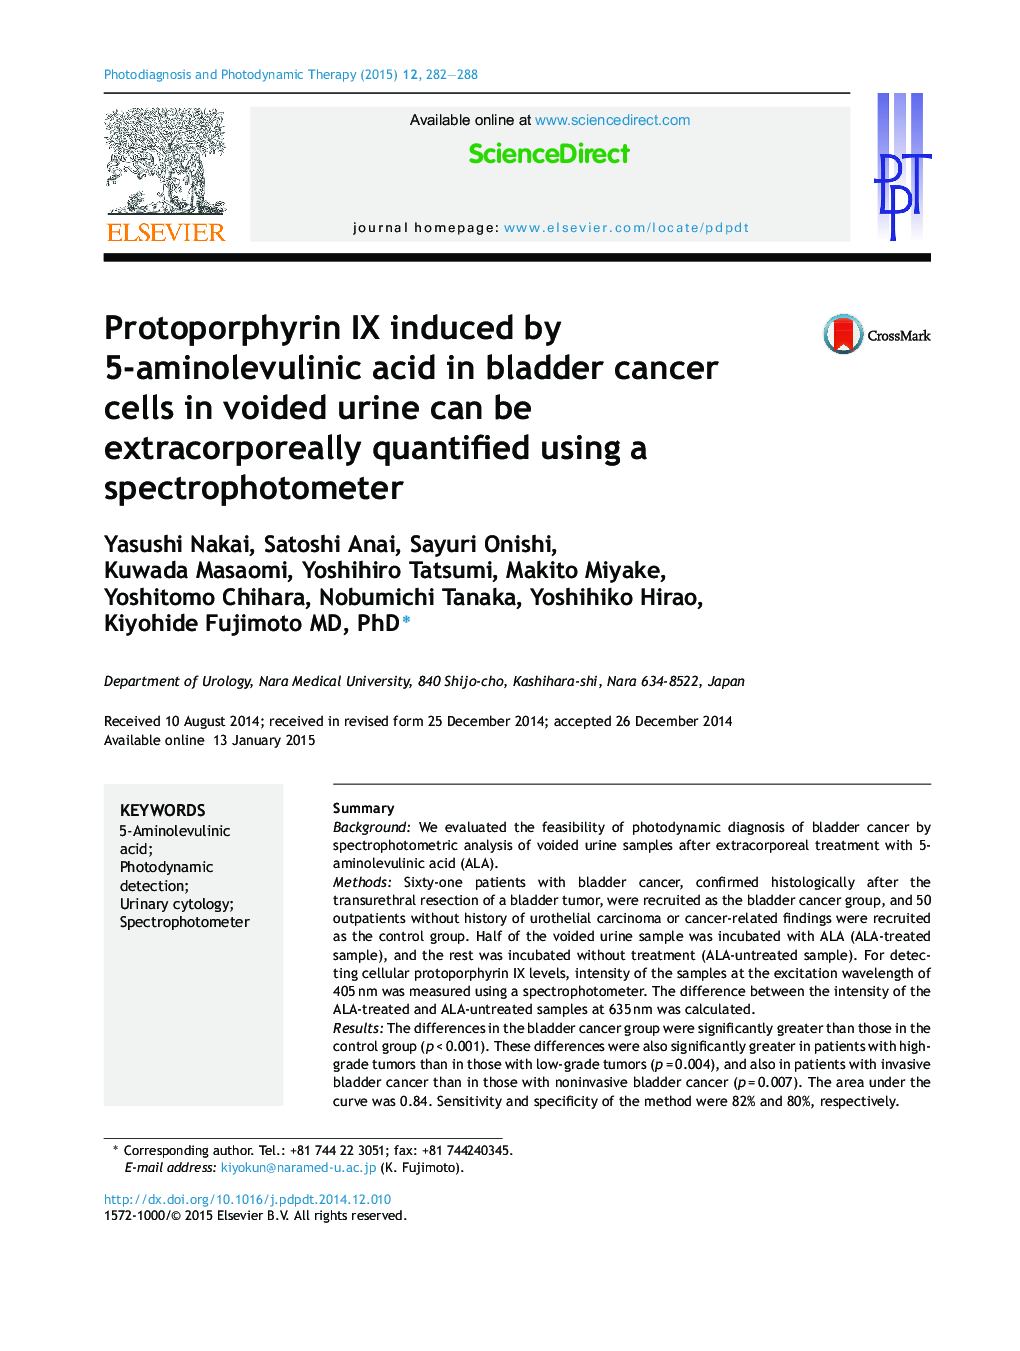 Protoporphyrin IX induced by 5-aminolevulinic acid in bladder cancer cells in voided urine can be extracorporeally quantified using a spectrophotometer